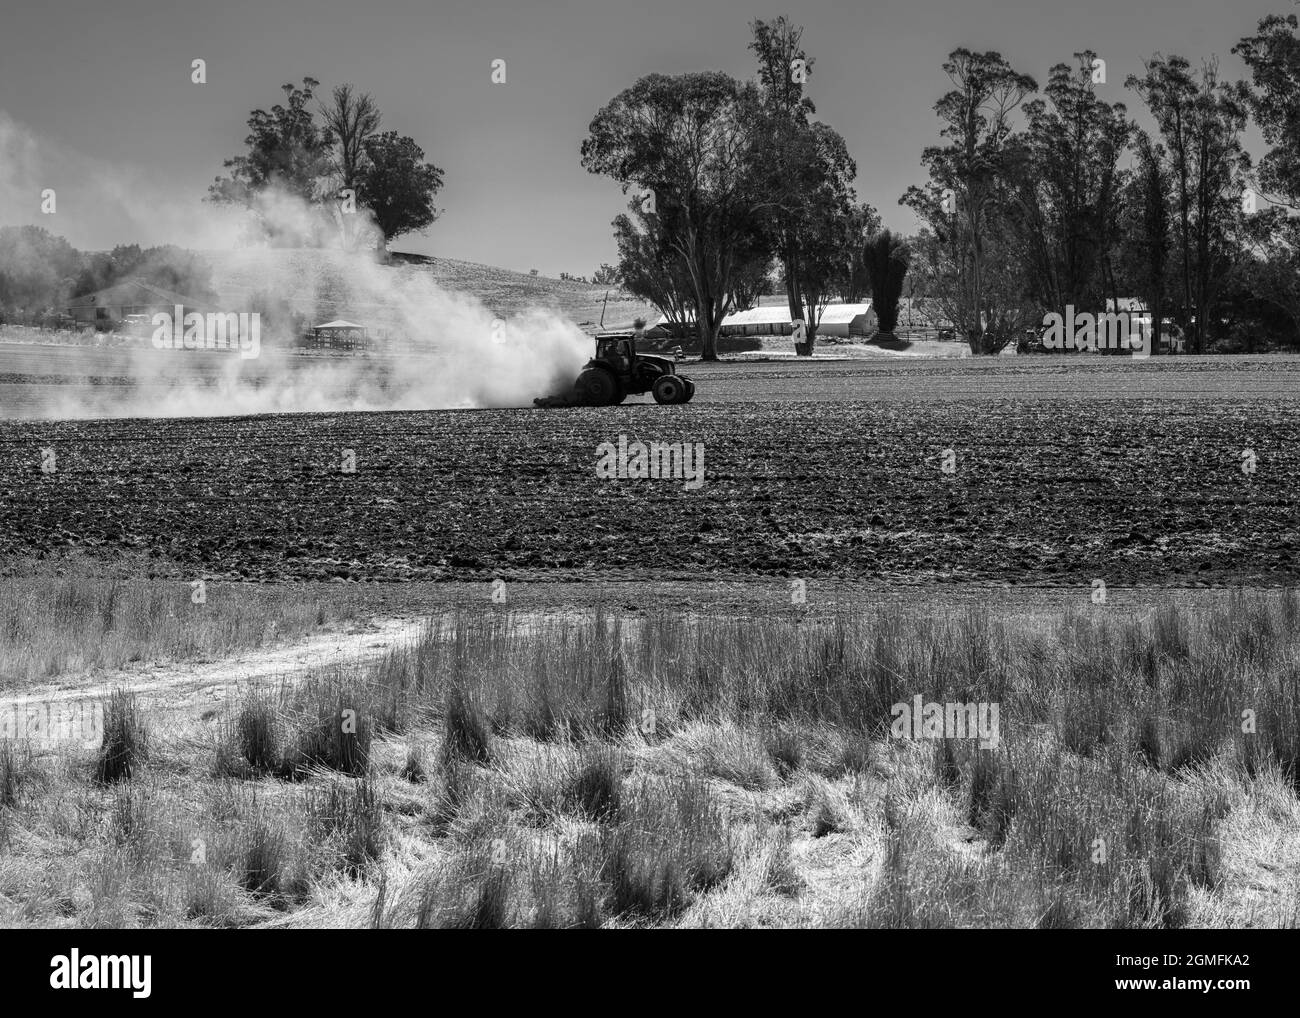 A tractor and farmer plough the field leaving an impressive plume of field dust in its wake. Stock Photo